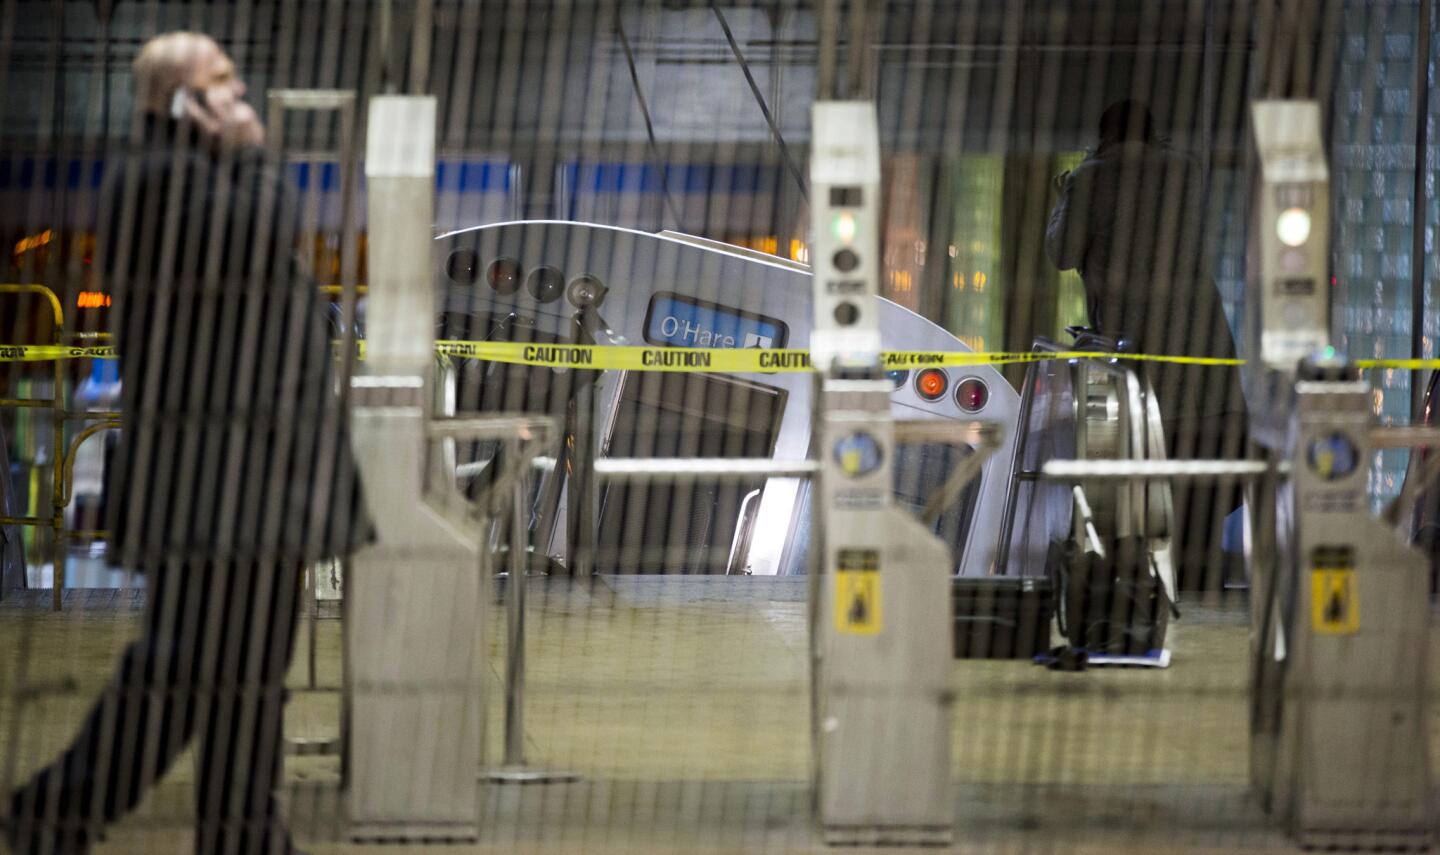 A derailed Chicago Transit Authority train car rests on an escalator at the O'Hare airport station early Monday.